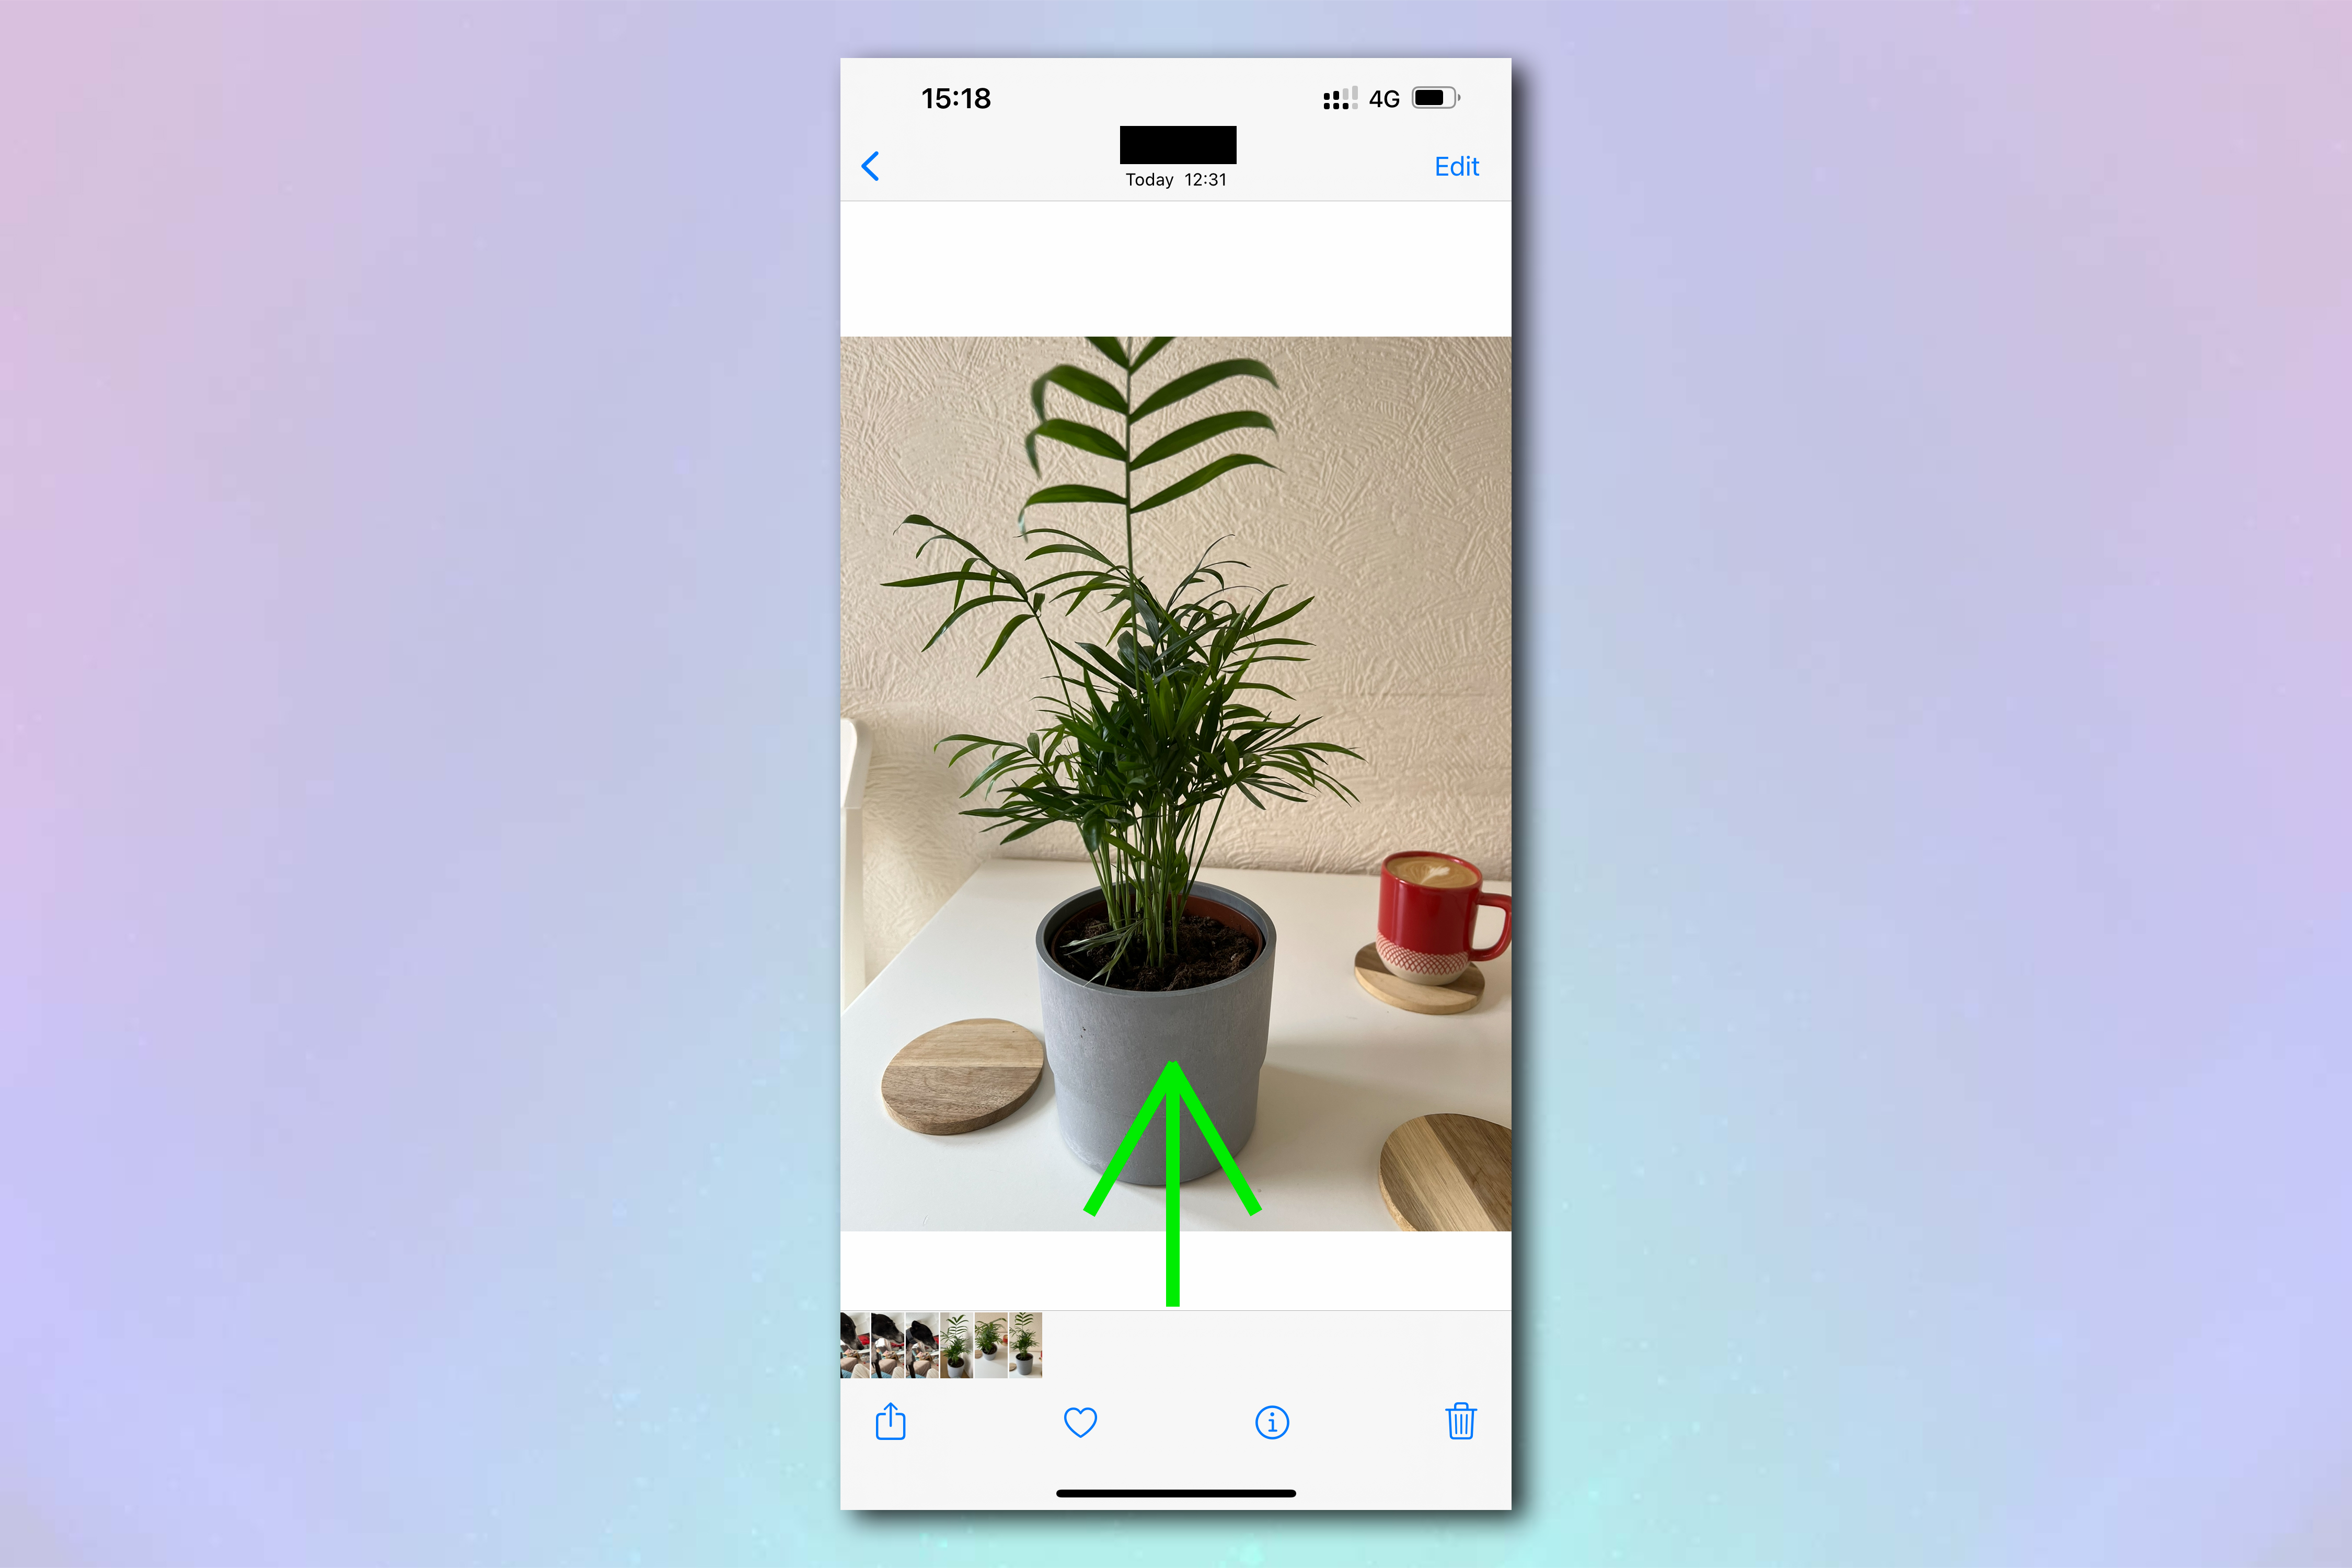 A screenshot of an image in the iPhone Photos app, with a green arrow prompting the user to swipe up